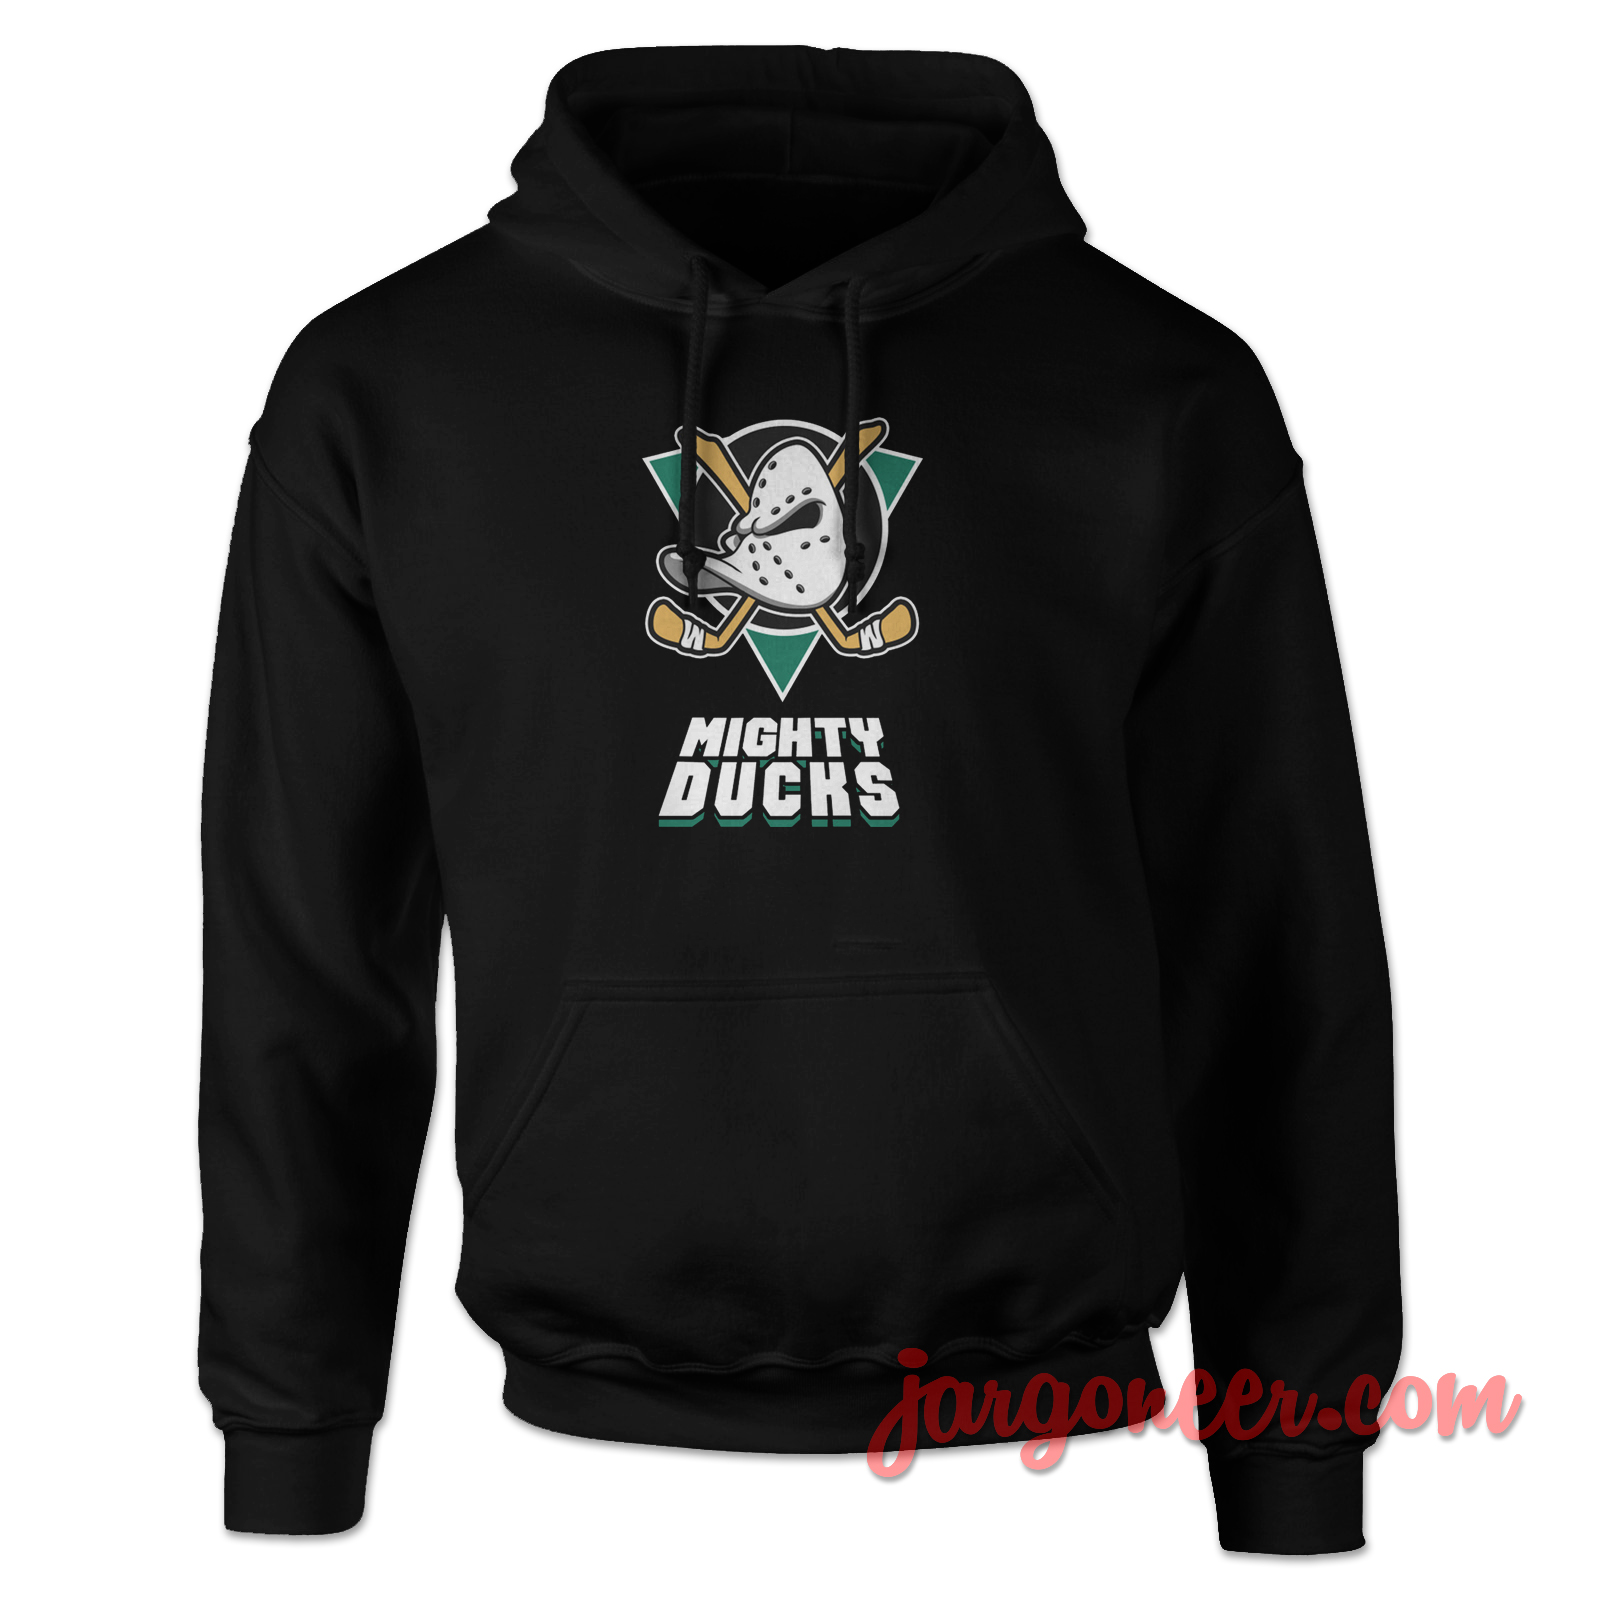 The Mighty Duck - Shop Unique Graphic Cool Shirt Designs